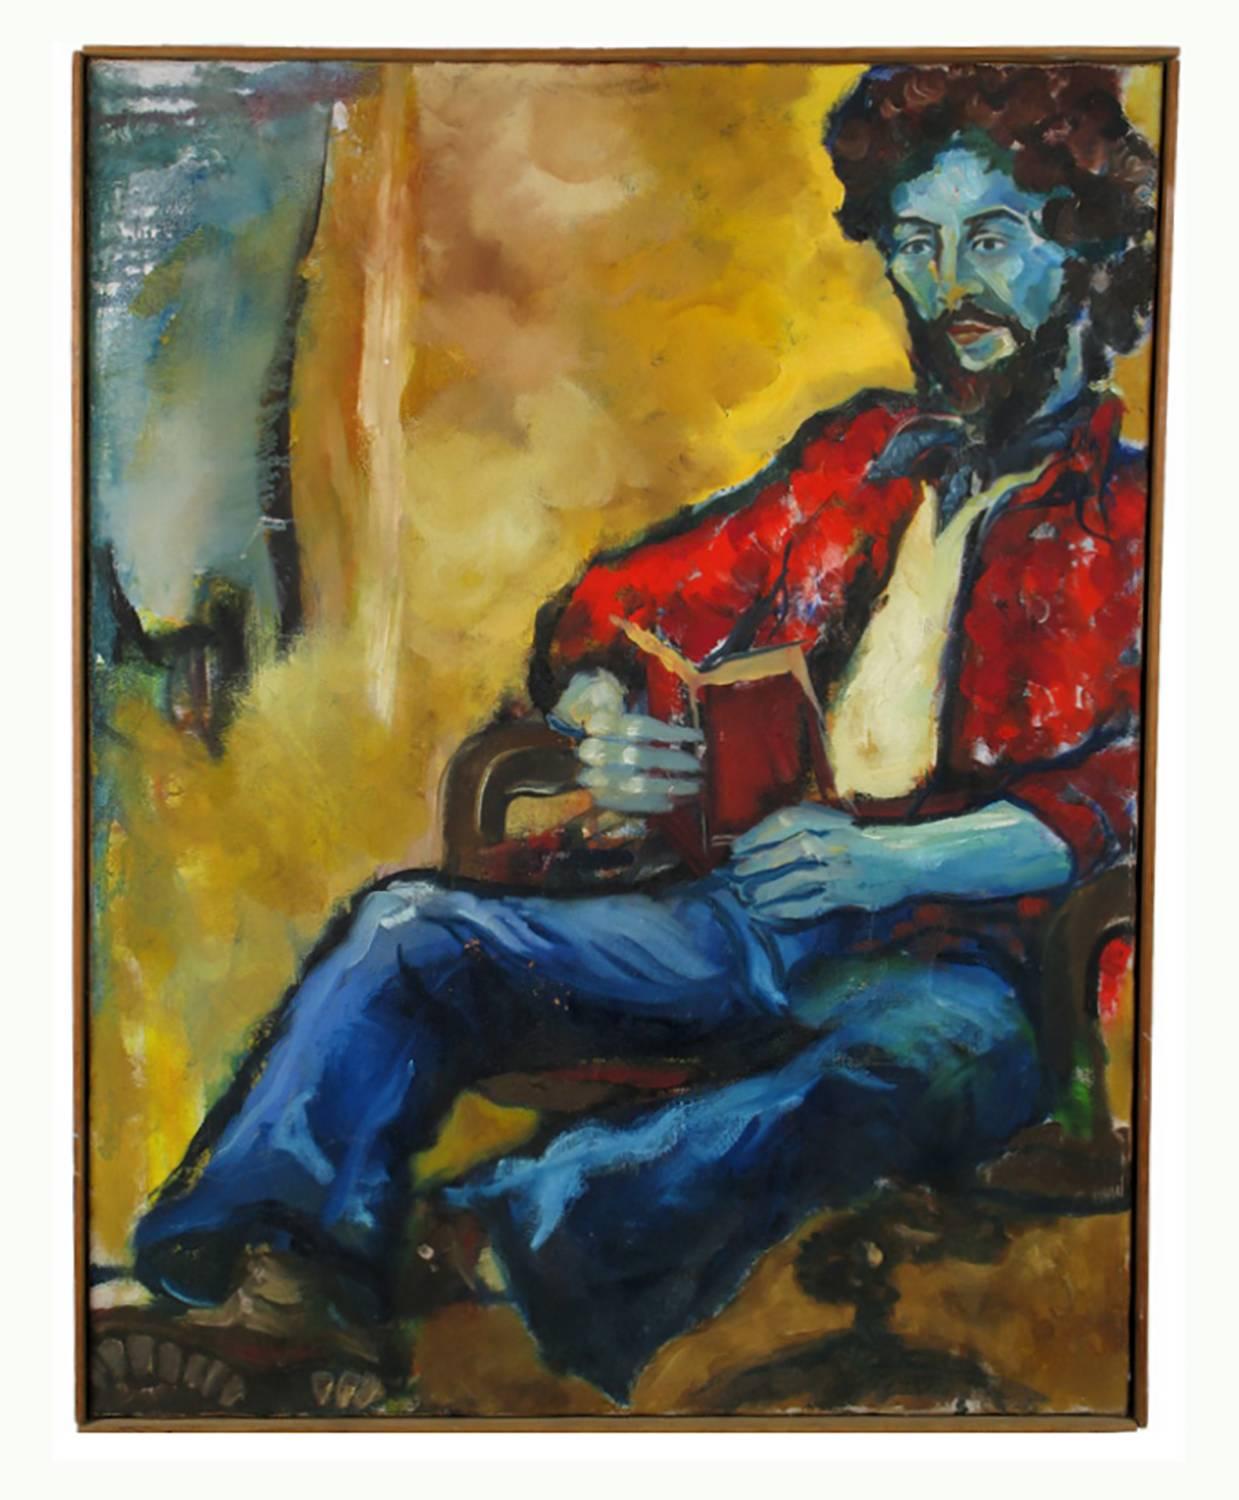 Expressionist portrait of a bearded young man in a red shirt and blue jeans, reading from a book. Signed An Hua Hsiung in verso. Rustic wood frame.